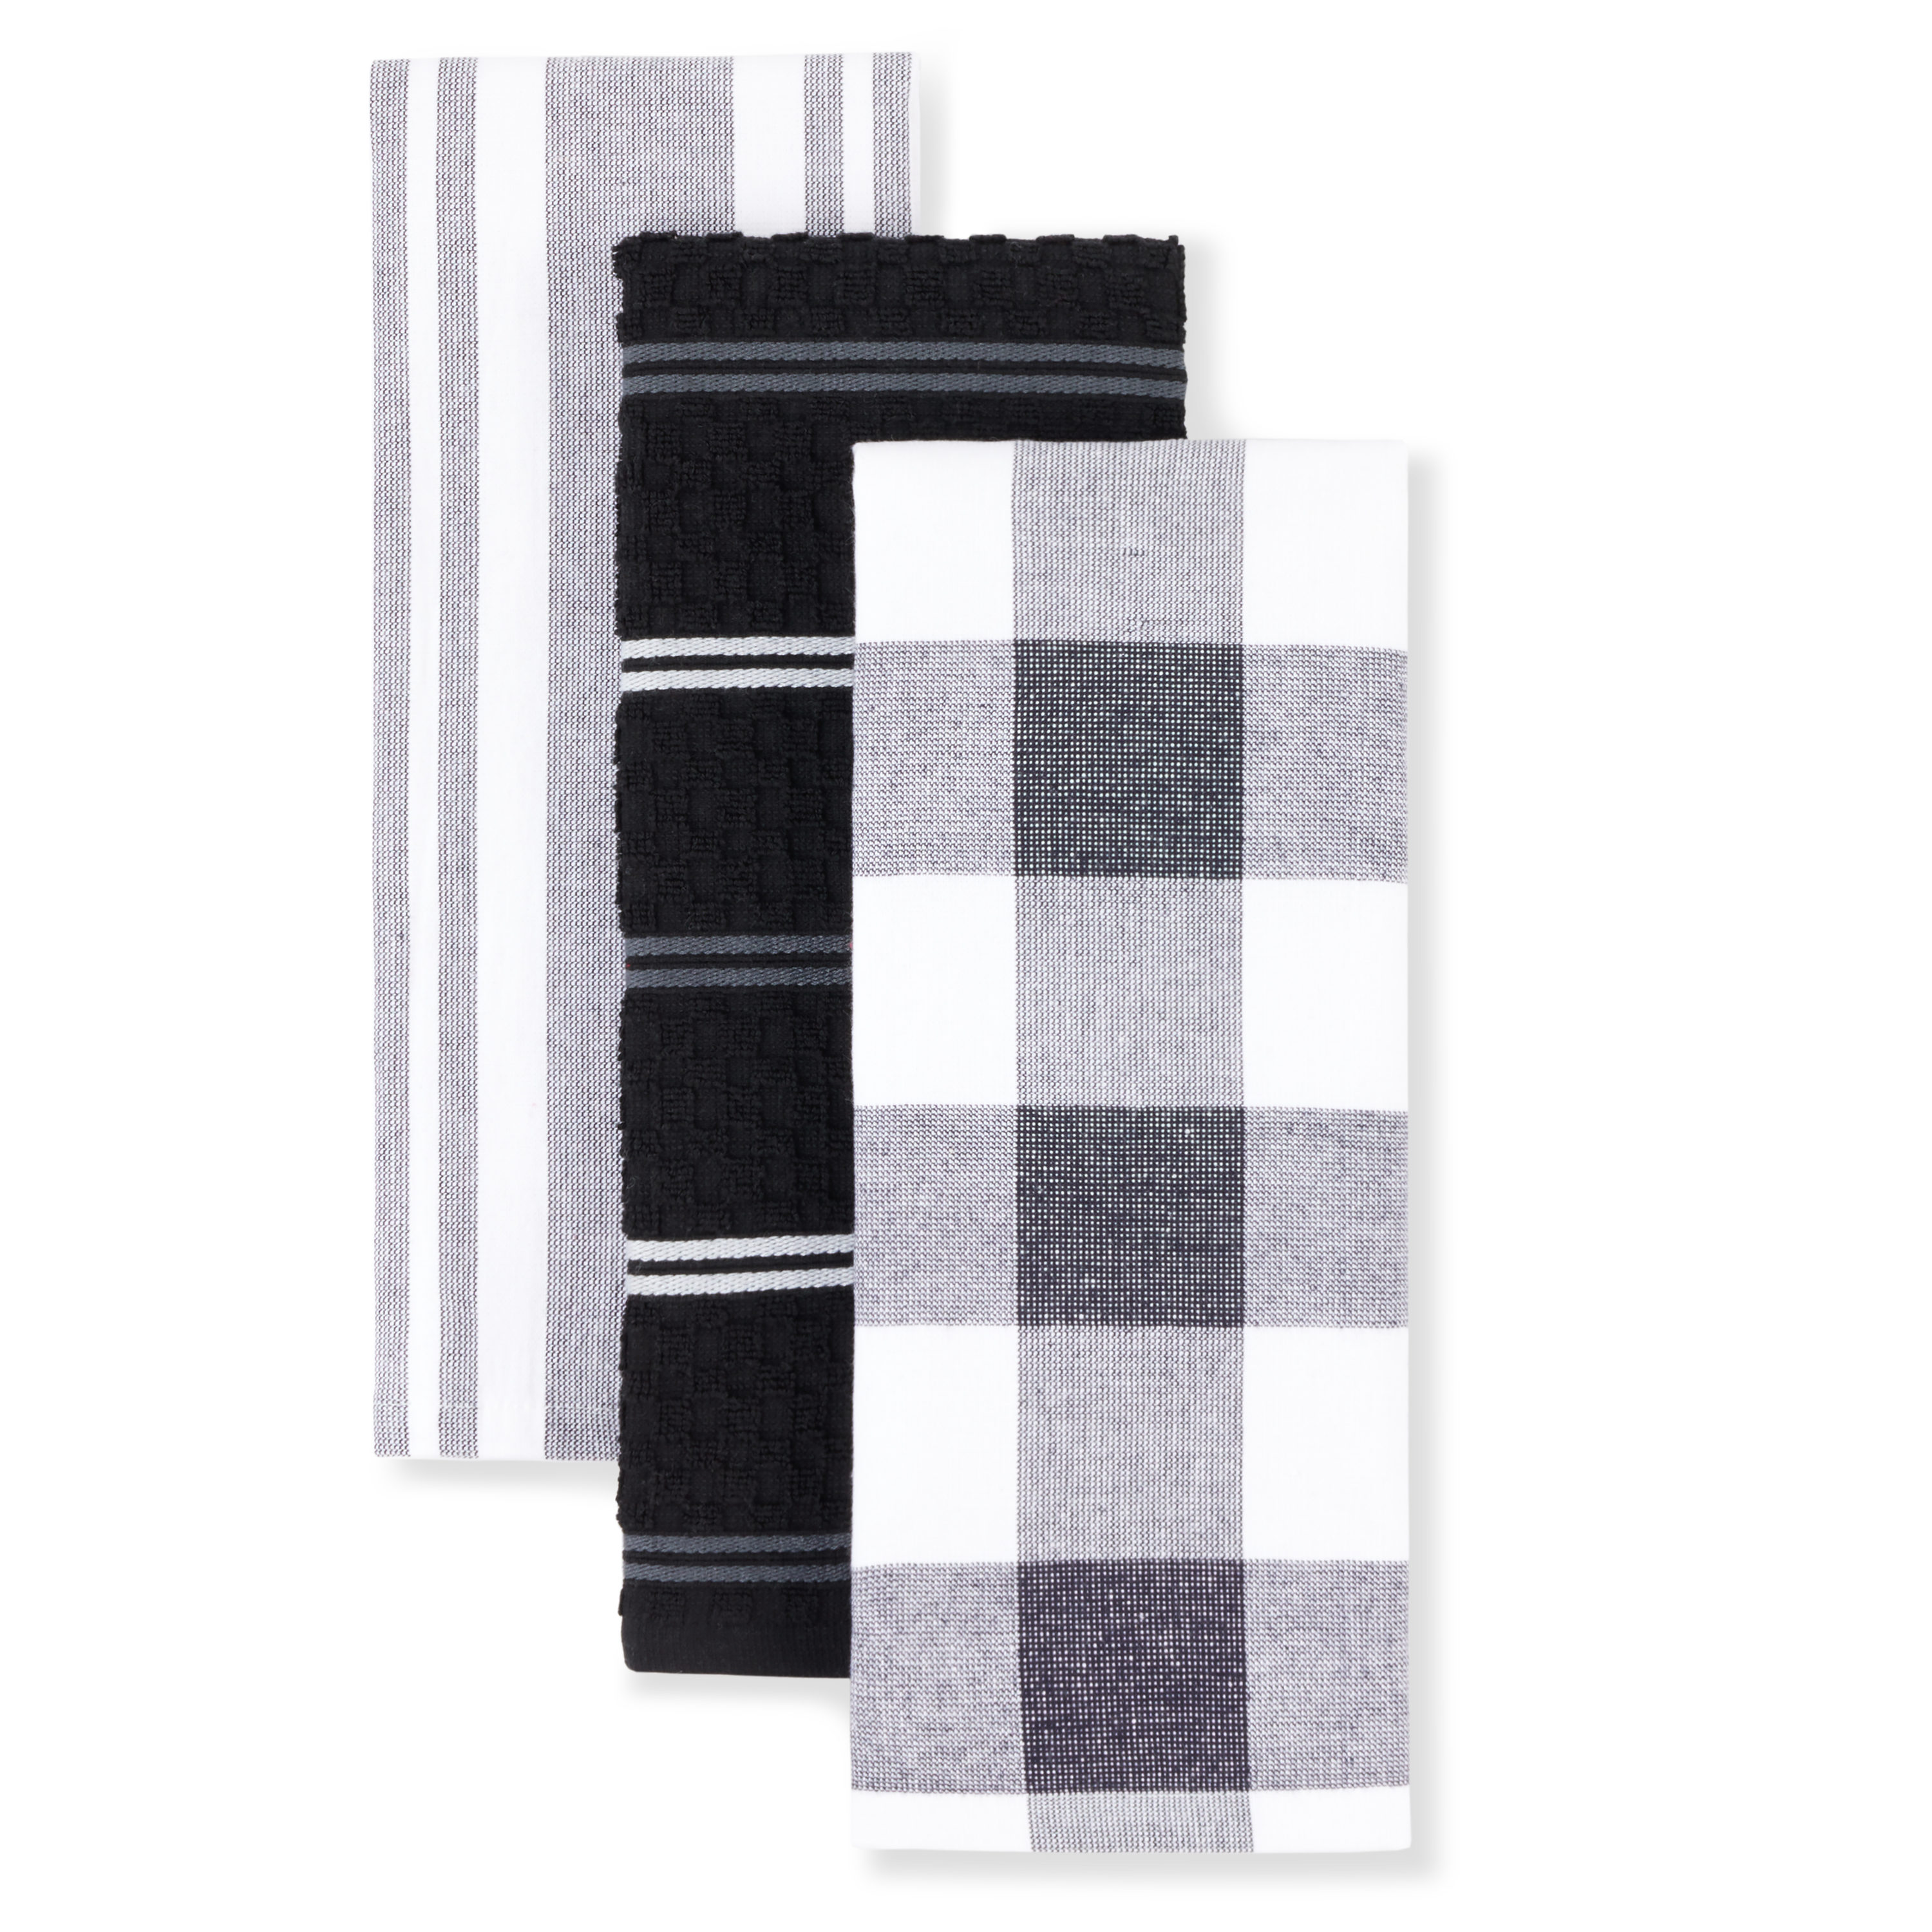 All-Clad Textiles Kitchen Towel, Solid-2 Pack, Black